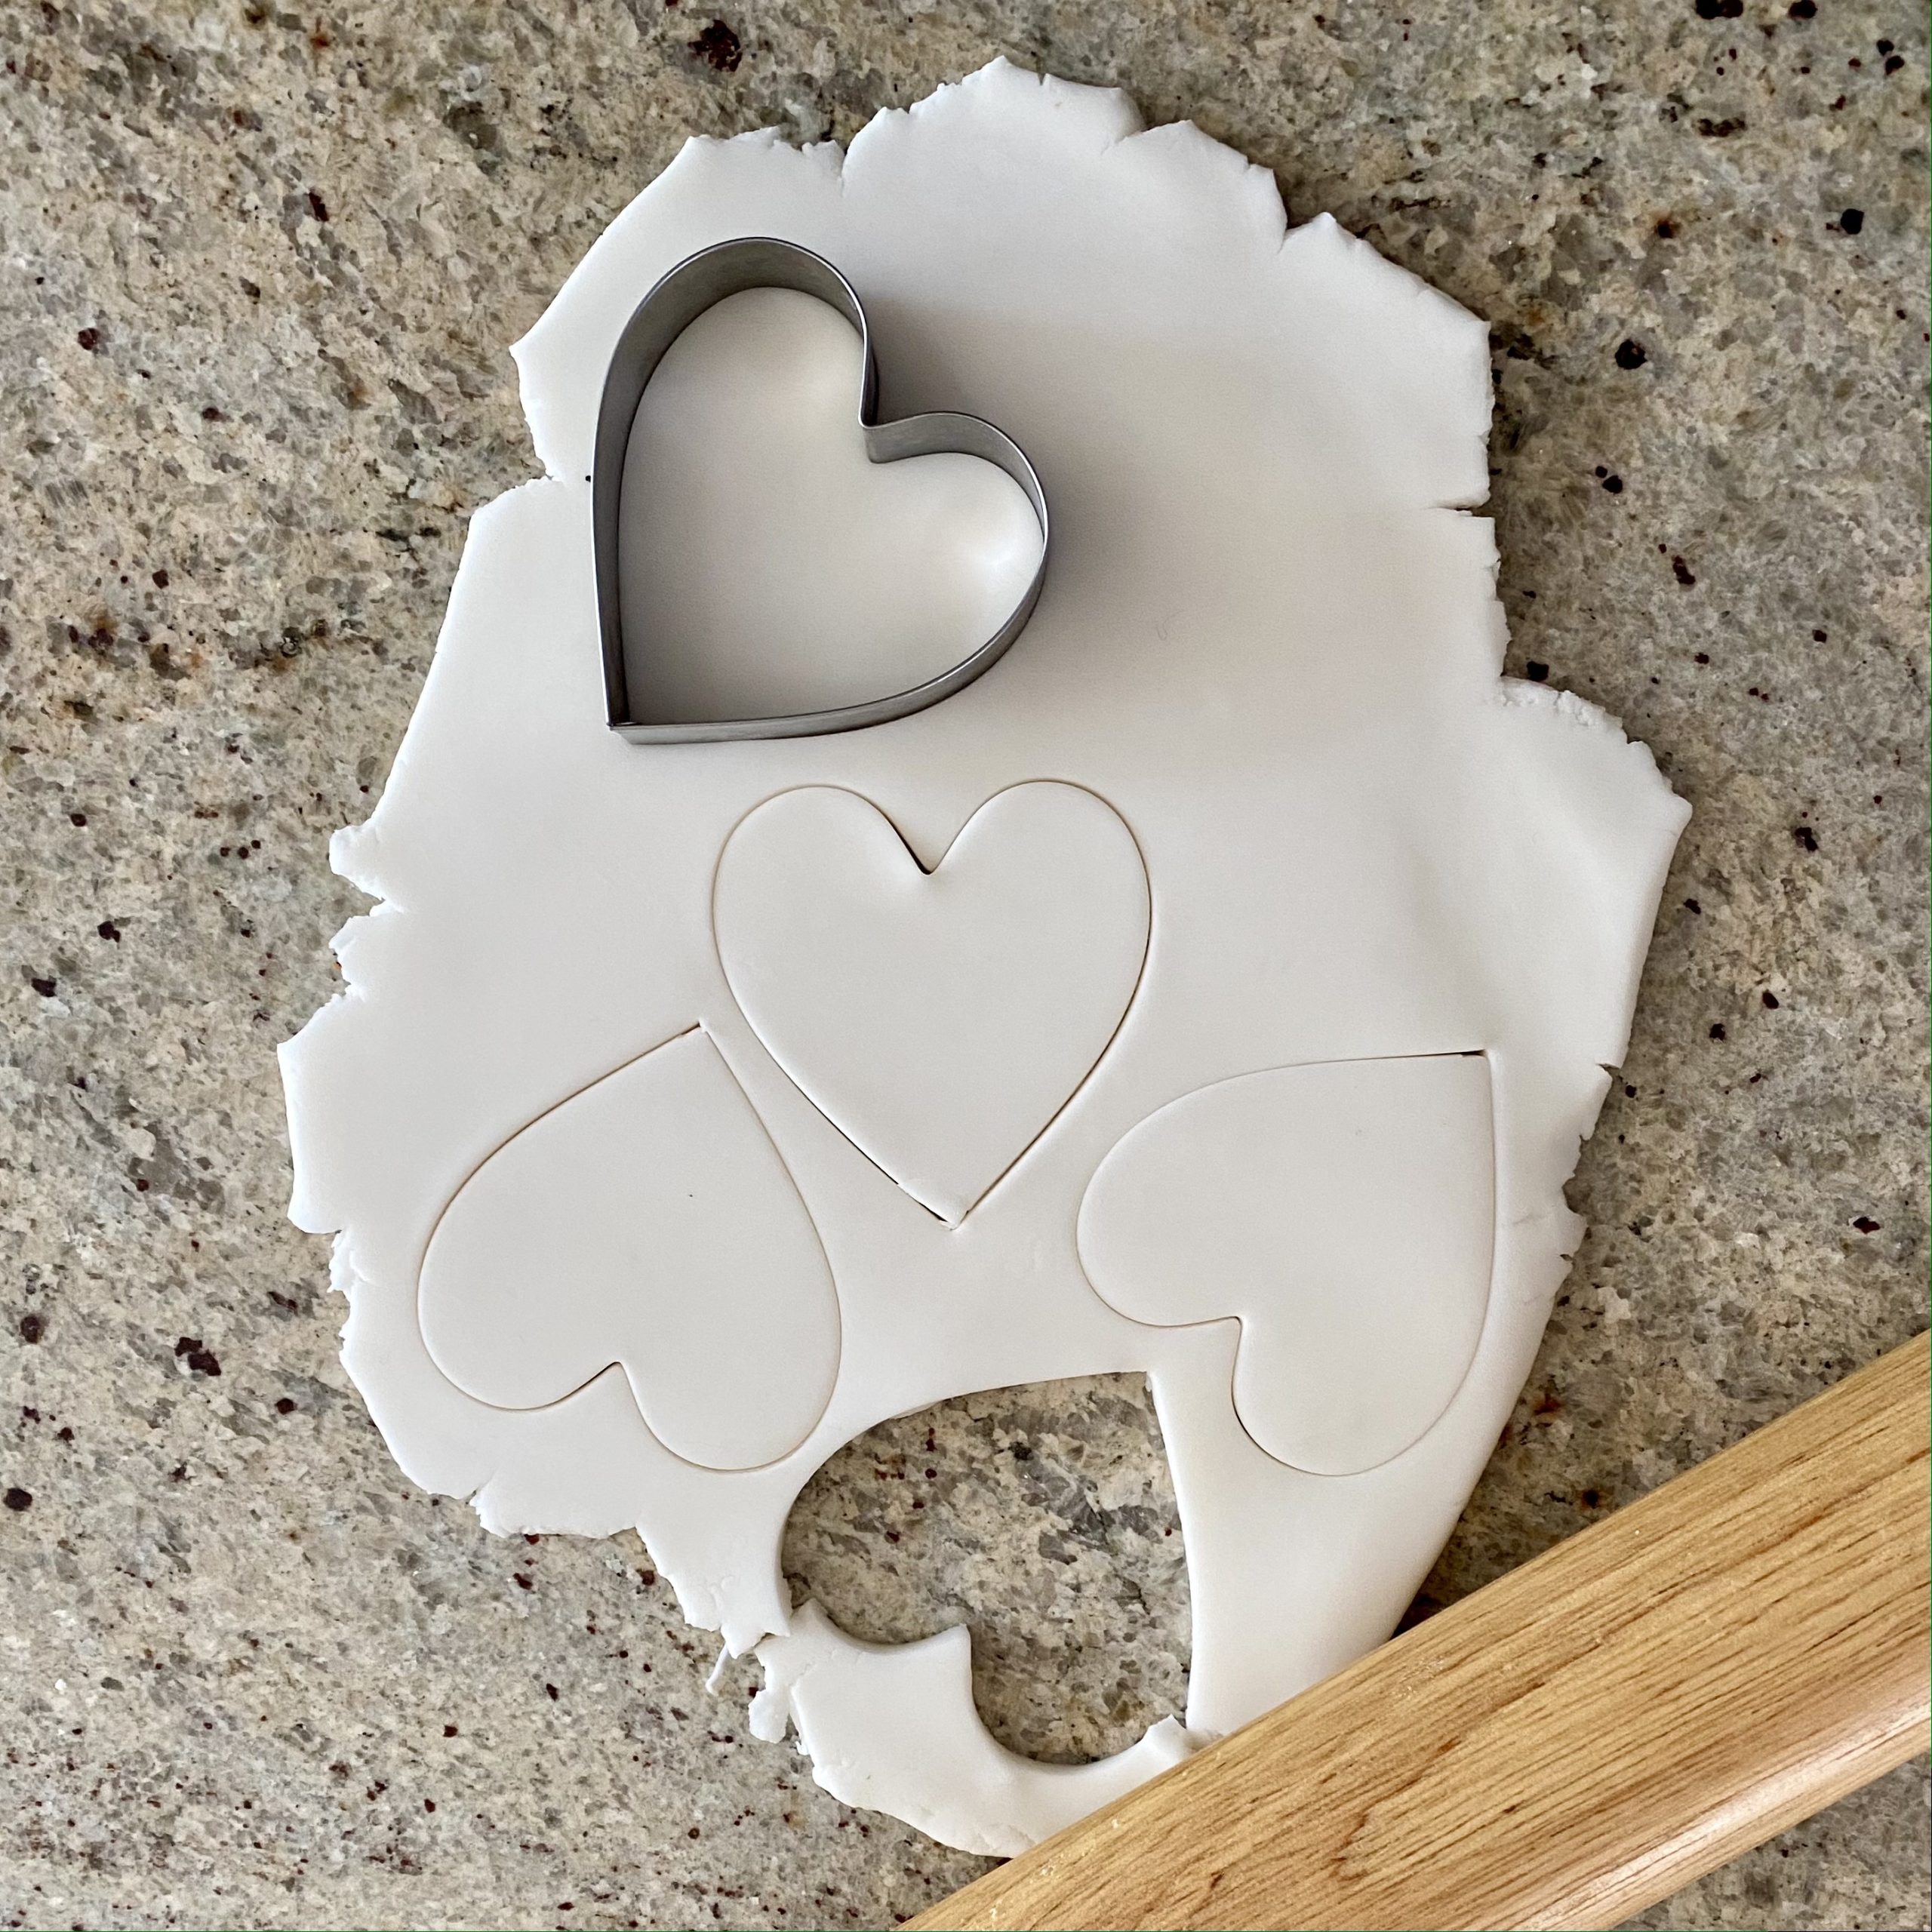 Baking soda dough rolled out and heart shapes are cut out of it with a cookie cutter.